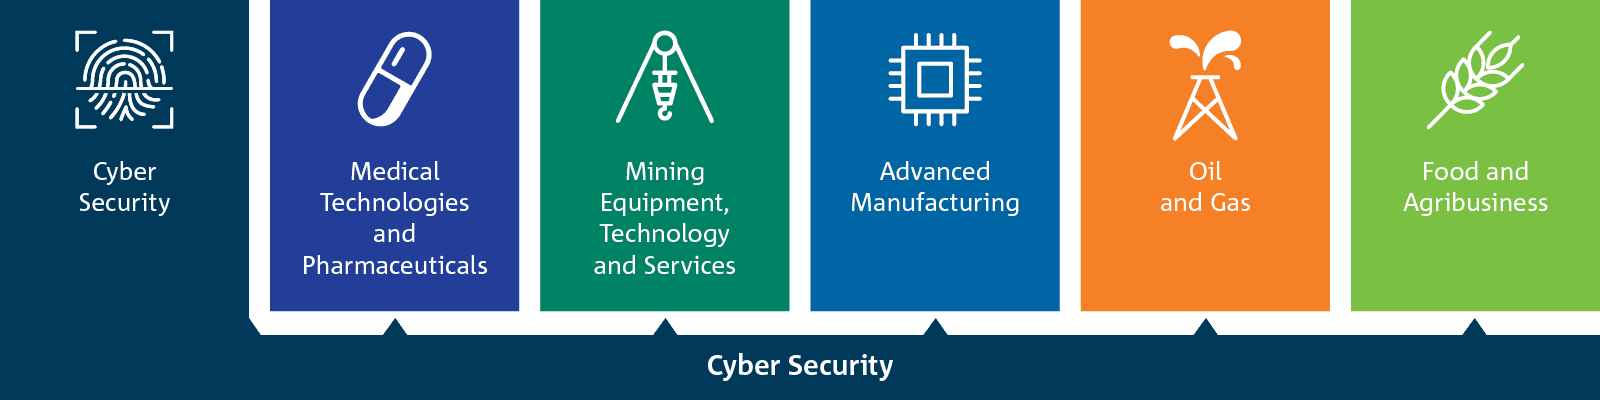 Cyber Security can play an important role in enabling growth opportunities in other sectors